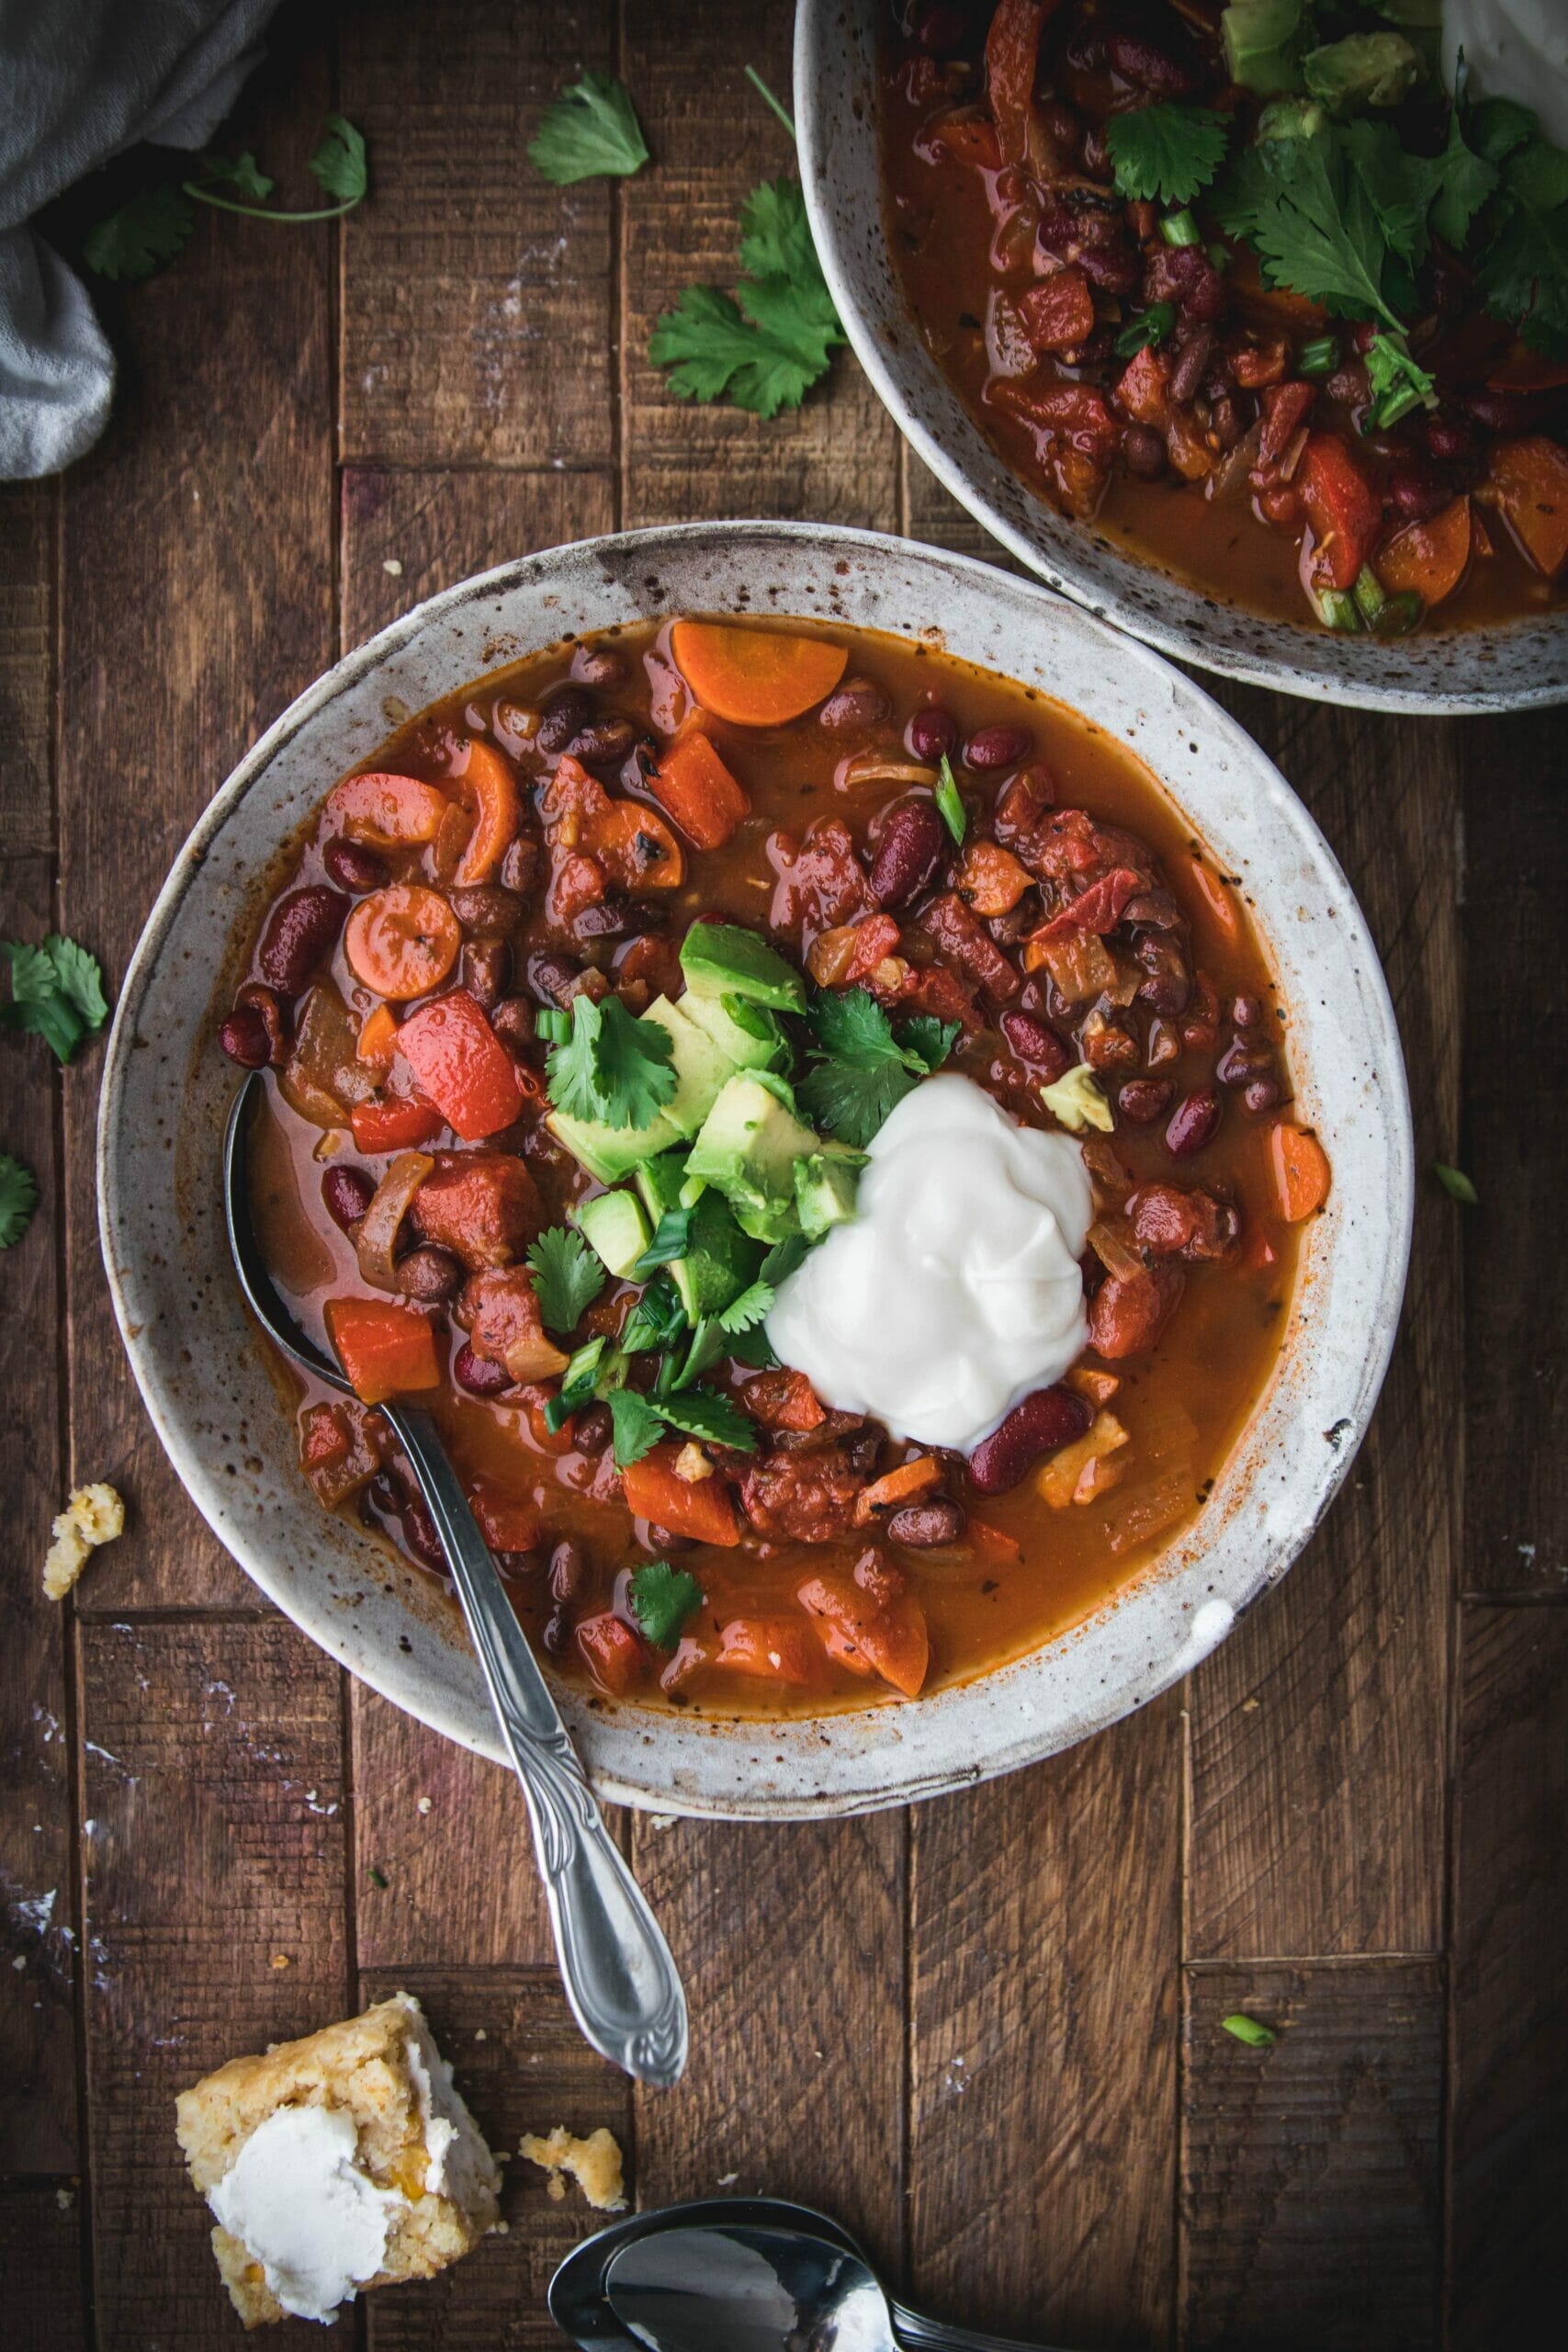 bowl of easy vegan chili topped with green onions, avocado, and sour cream on a wooden table